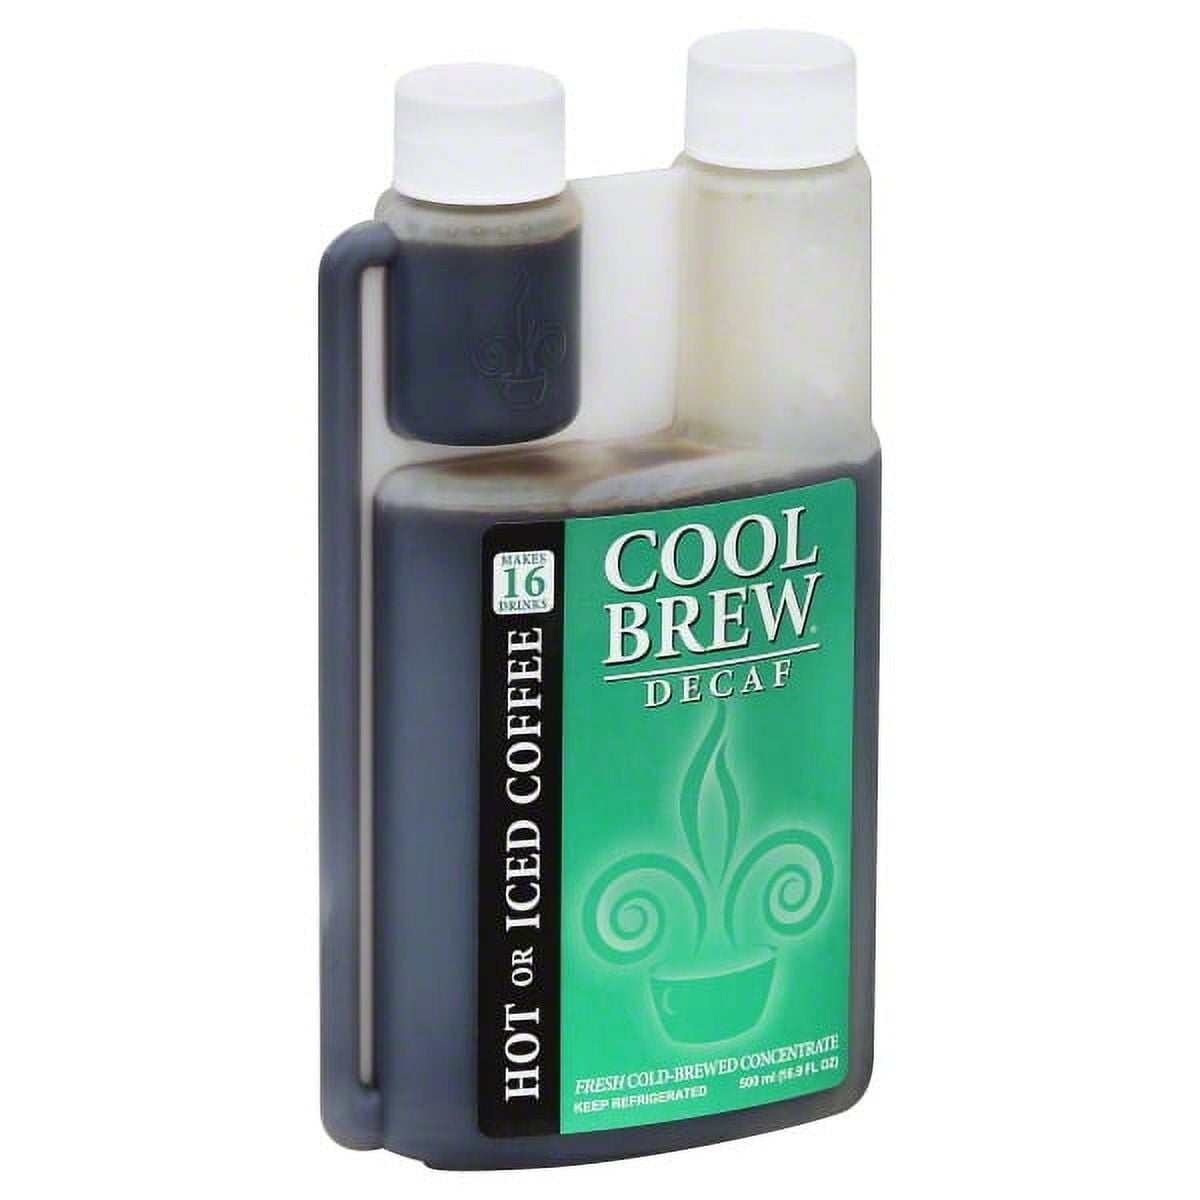 Cool Brew - Cool Brew Original Cold Brewed Coffee Concentrate 33.8 Ounces  (1 lt)